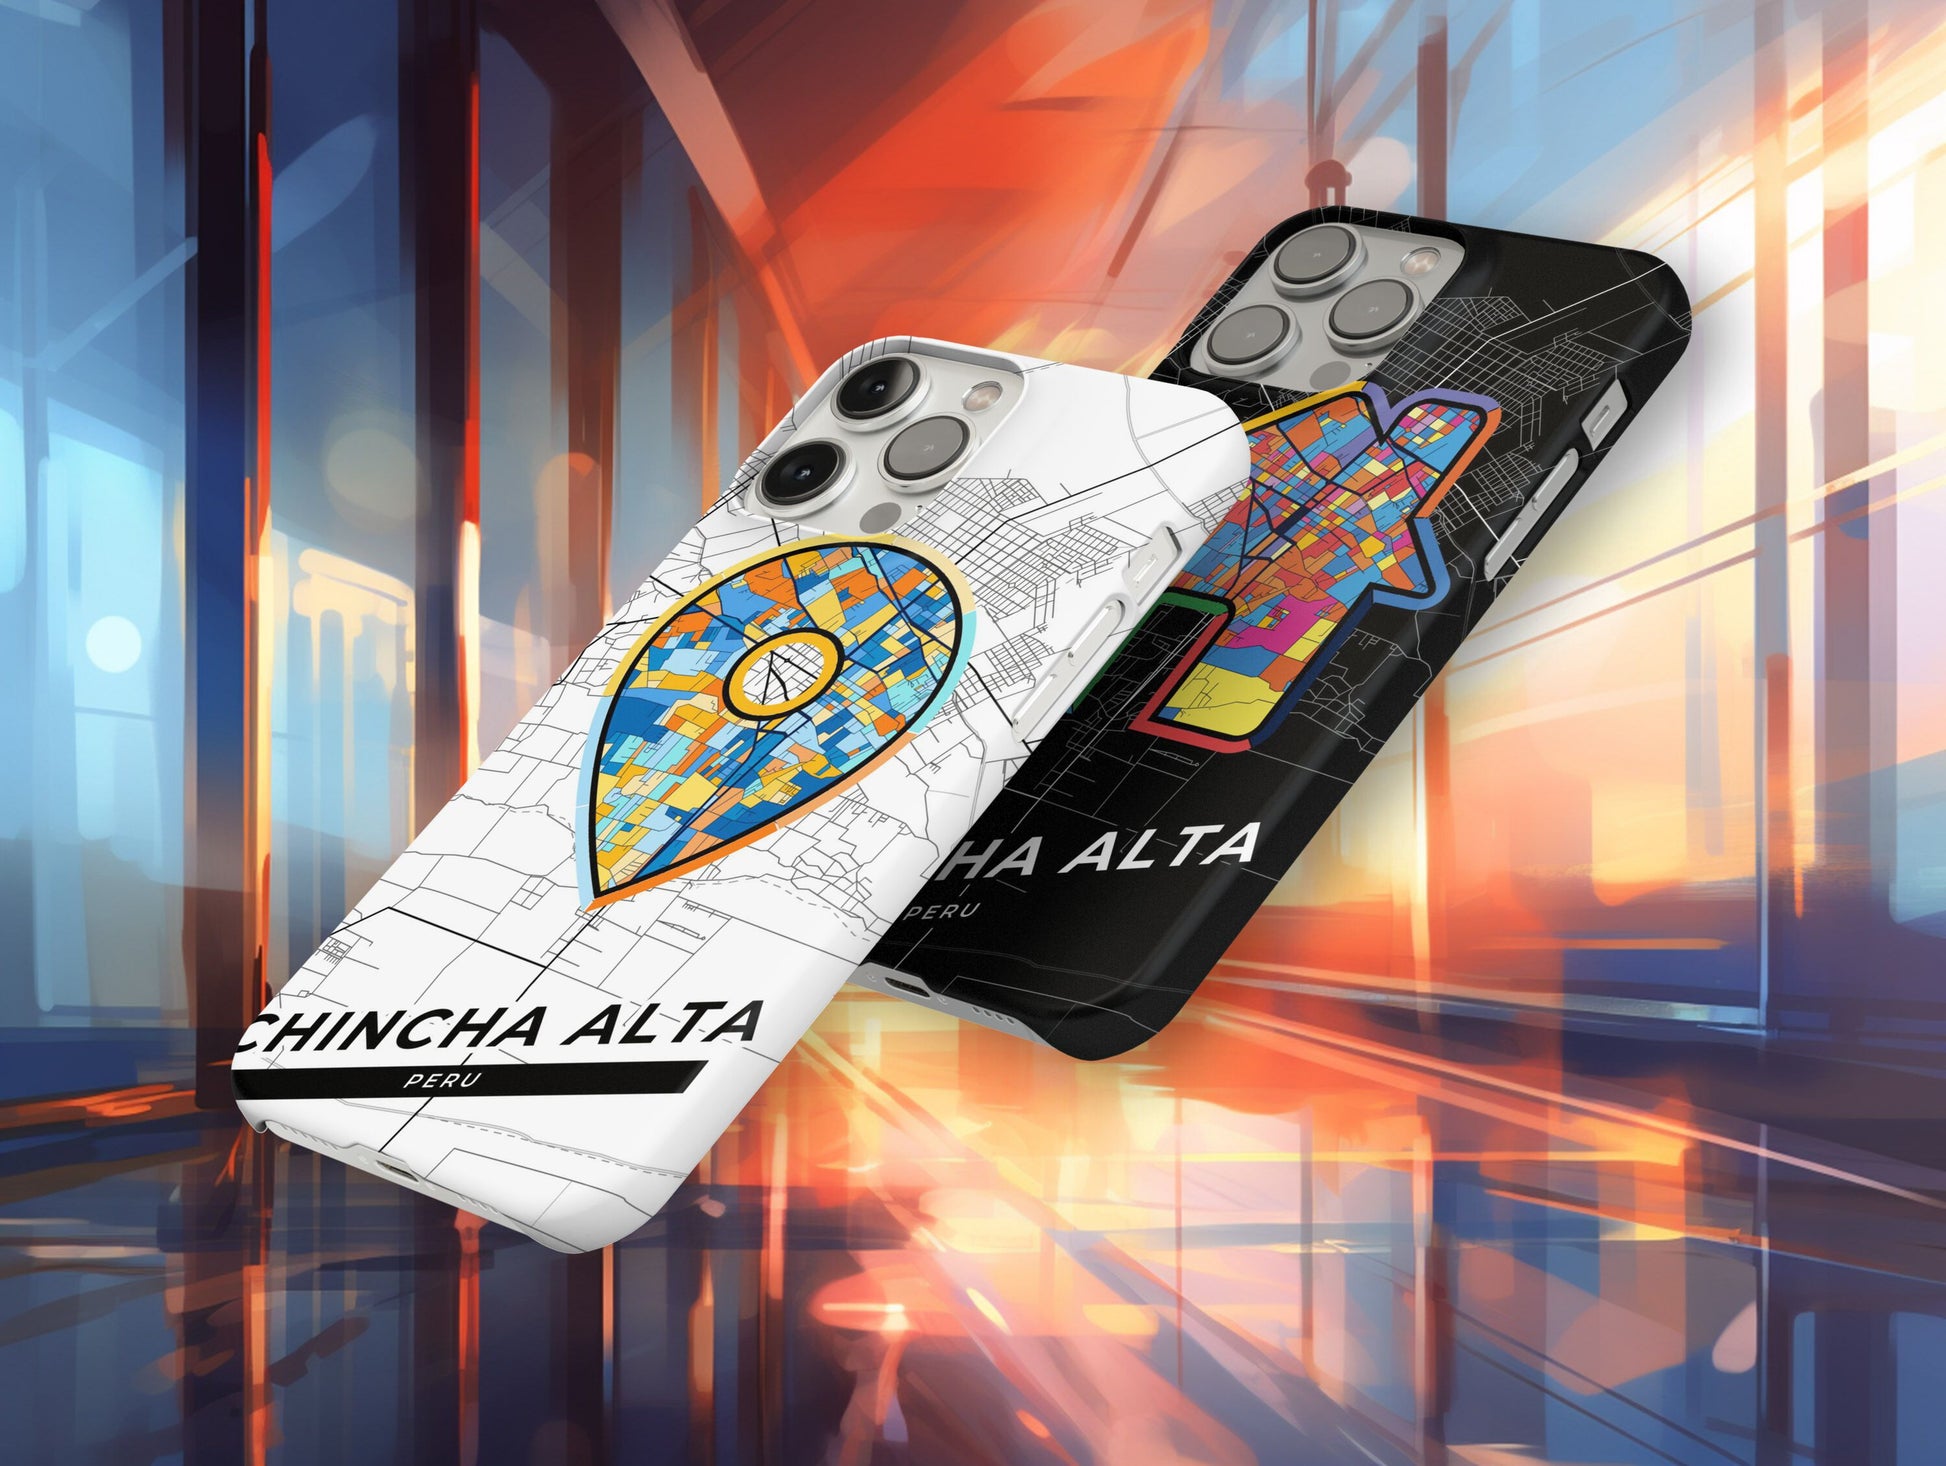 Chincha Alta Peru slim phone case with colorful icon. Birthday, wedding or housewarming gift. Couple match cases.